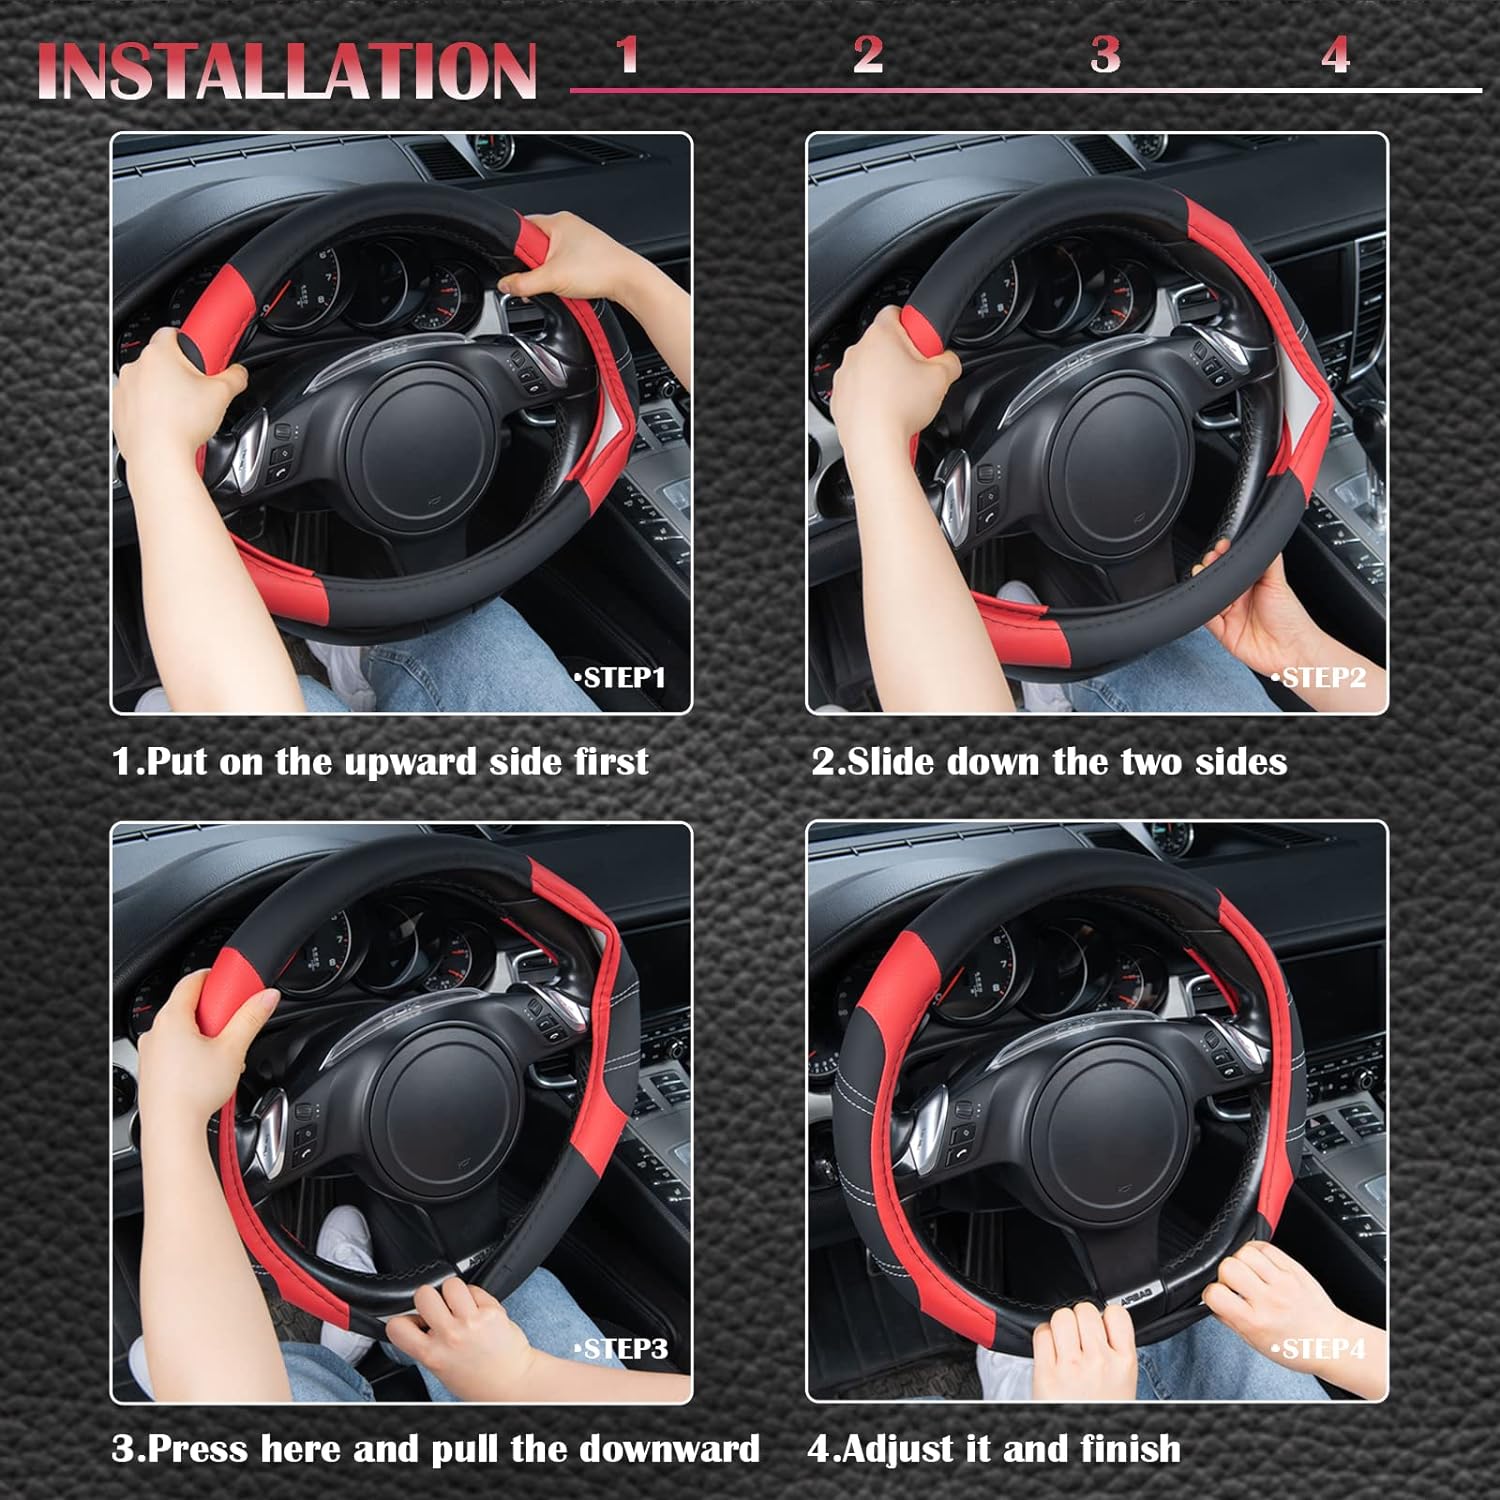 CAR PASS Steering Wheel Cover and Heavy Duty Leather Seat Cover Combo, Waterproof Automotive Seat Cover Fit for Most Sedans, SUV, Pick-Up, Truck.Black and Red